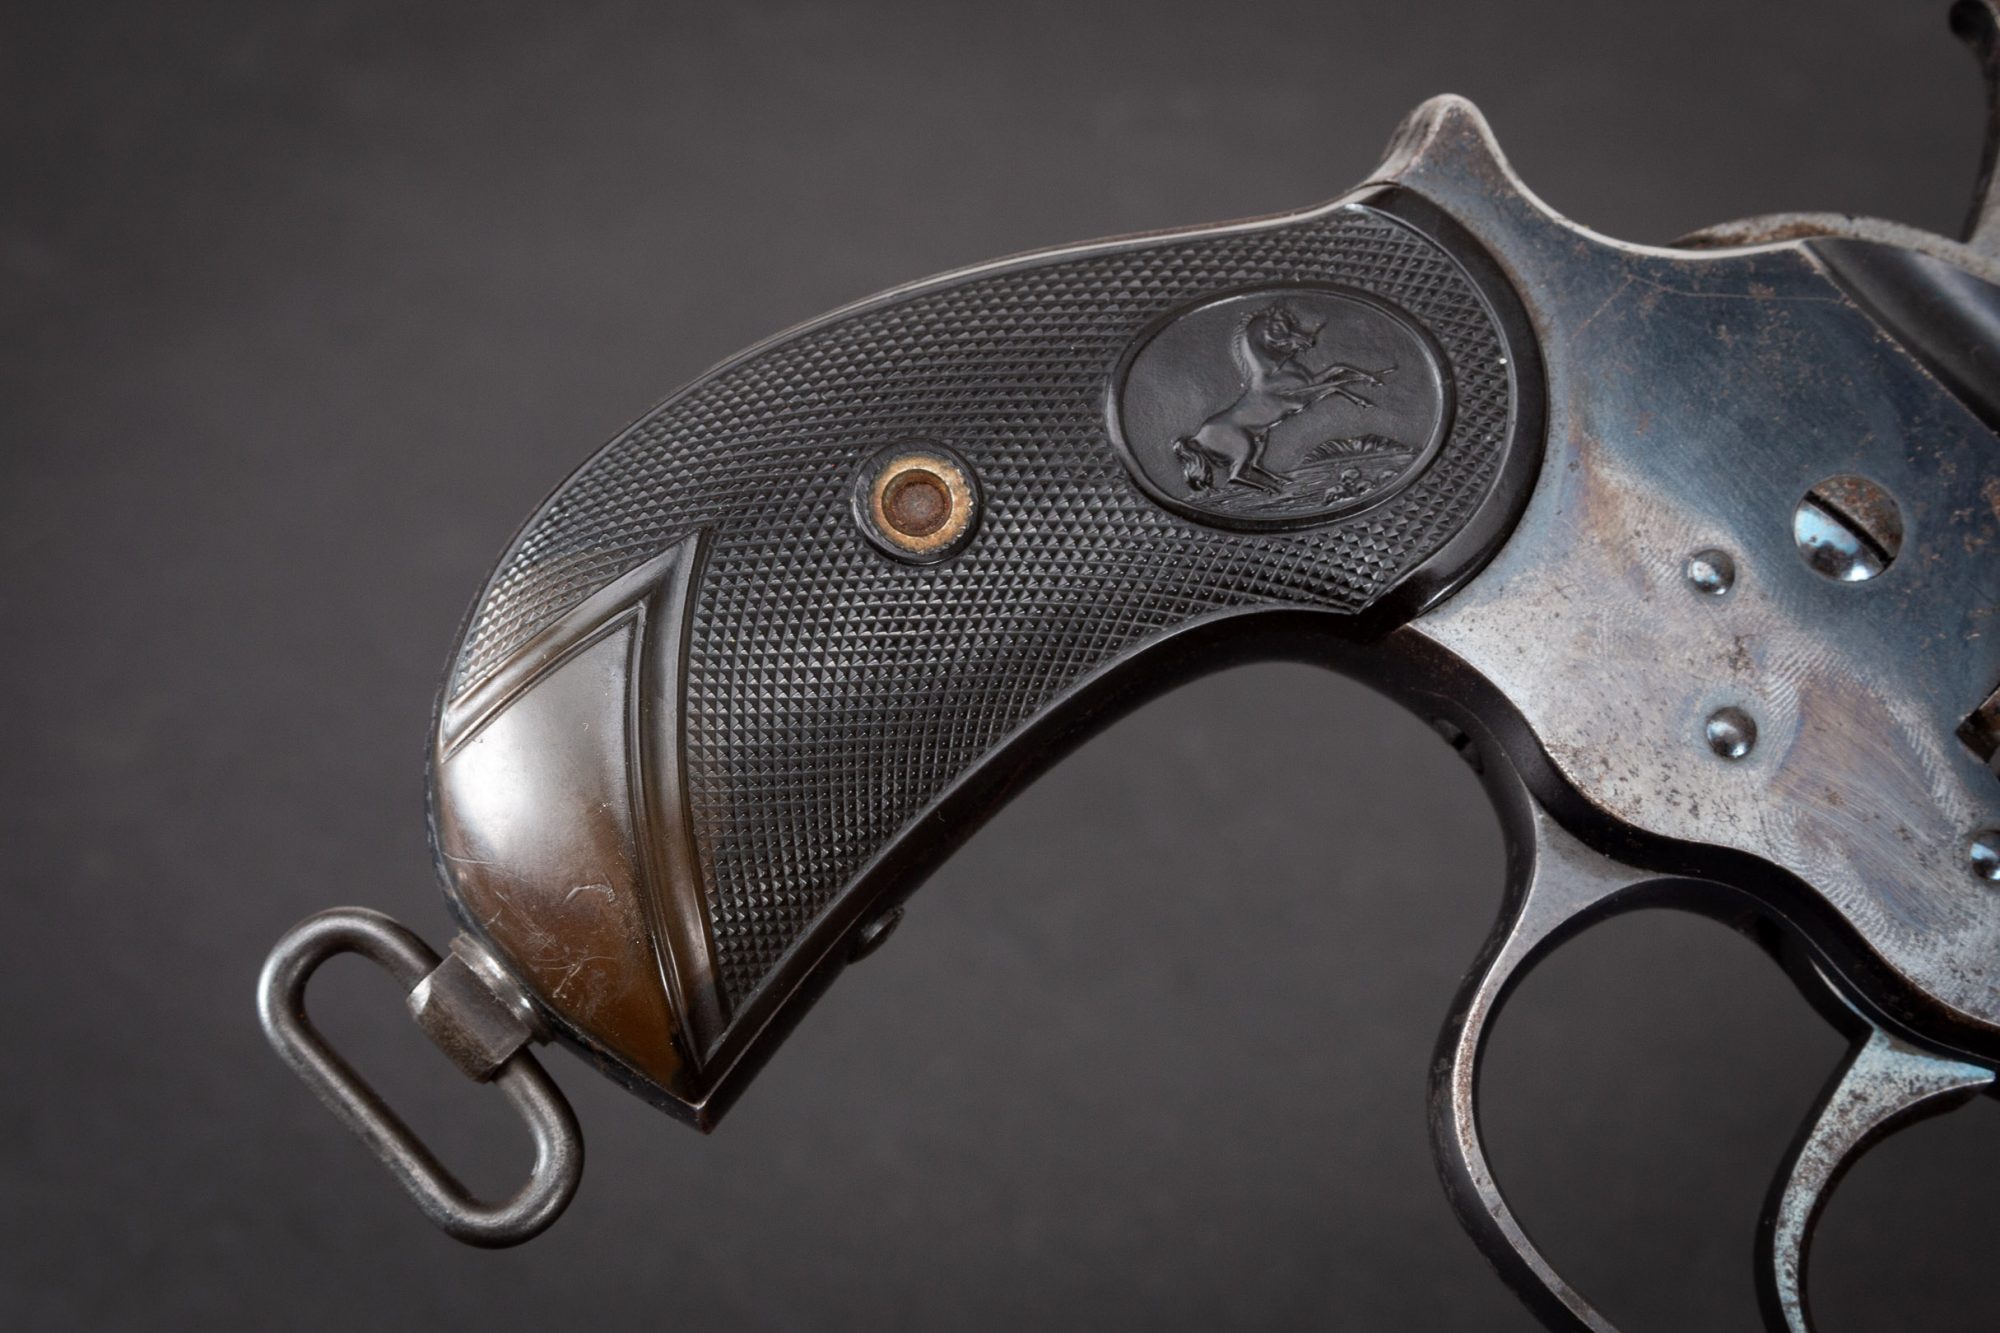 Photo of a pre-owned Colt 1878 Frontier Six Shooter, sold as-is by Turnbull Restoration